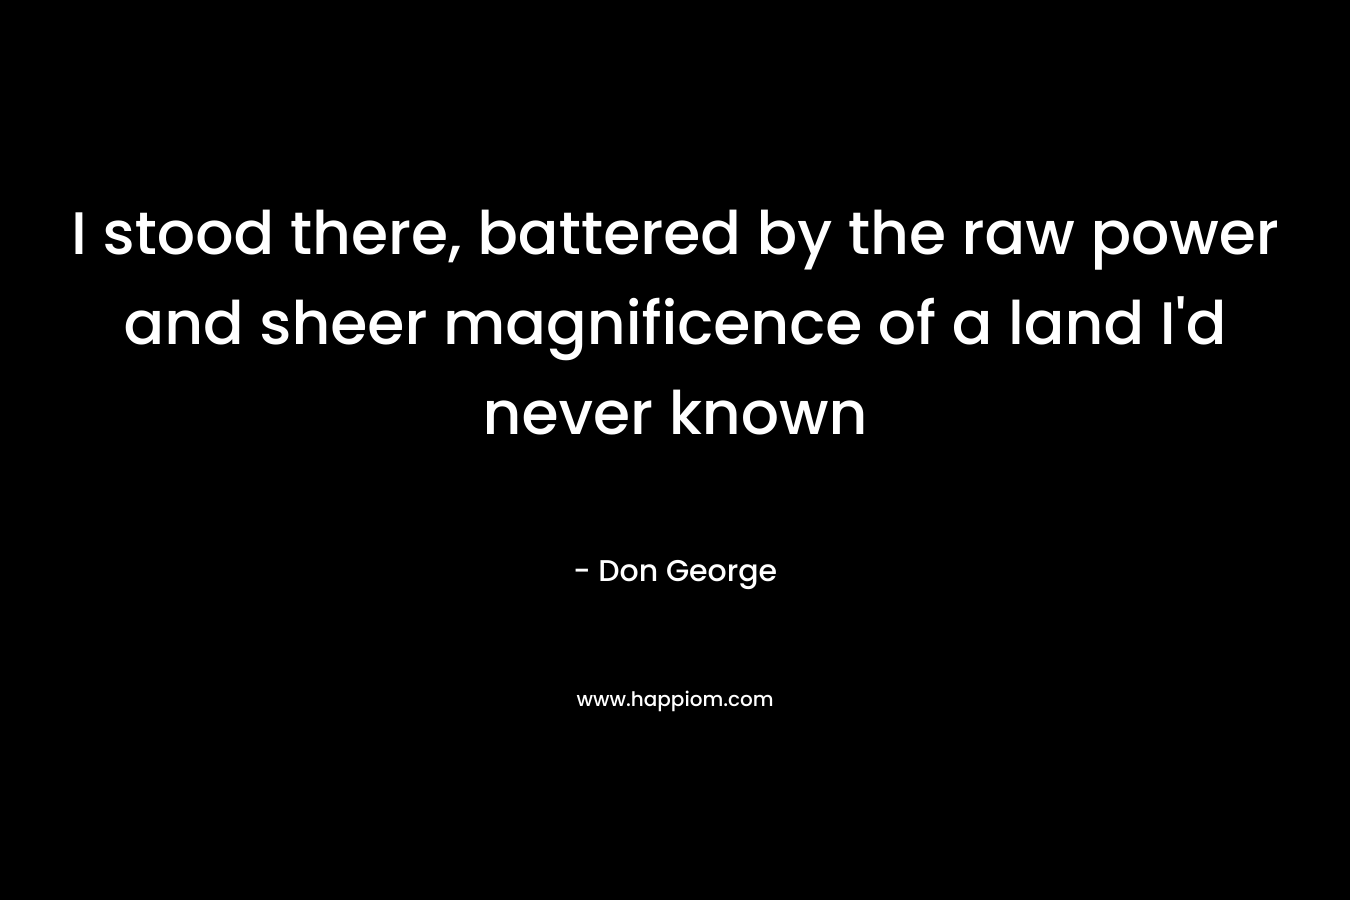 I stood there, battered by the raw power and sheer magnificence of a land I’d never known – Don George